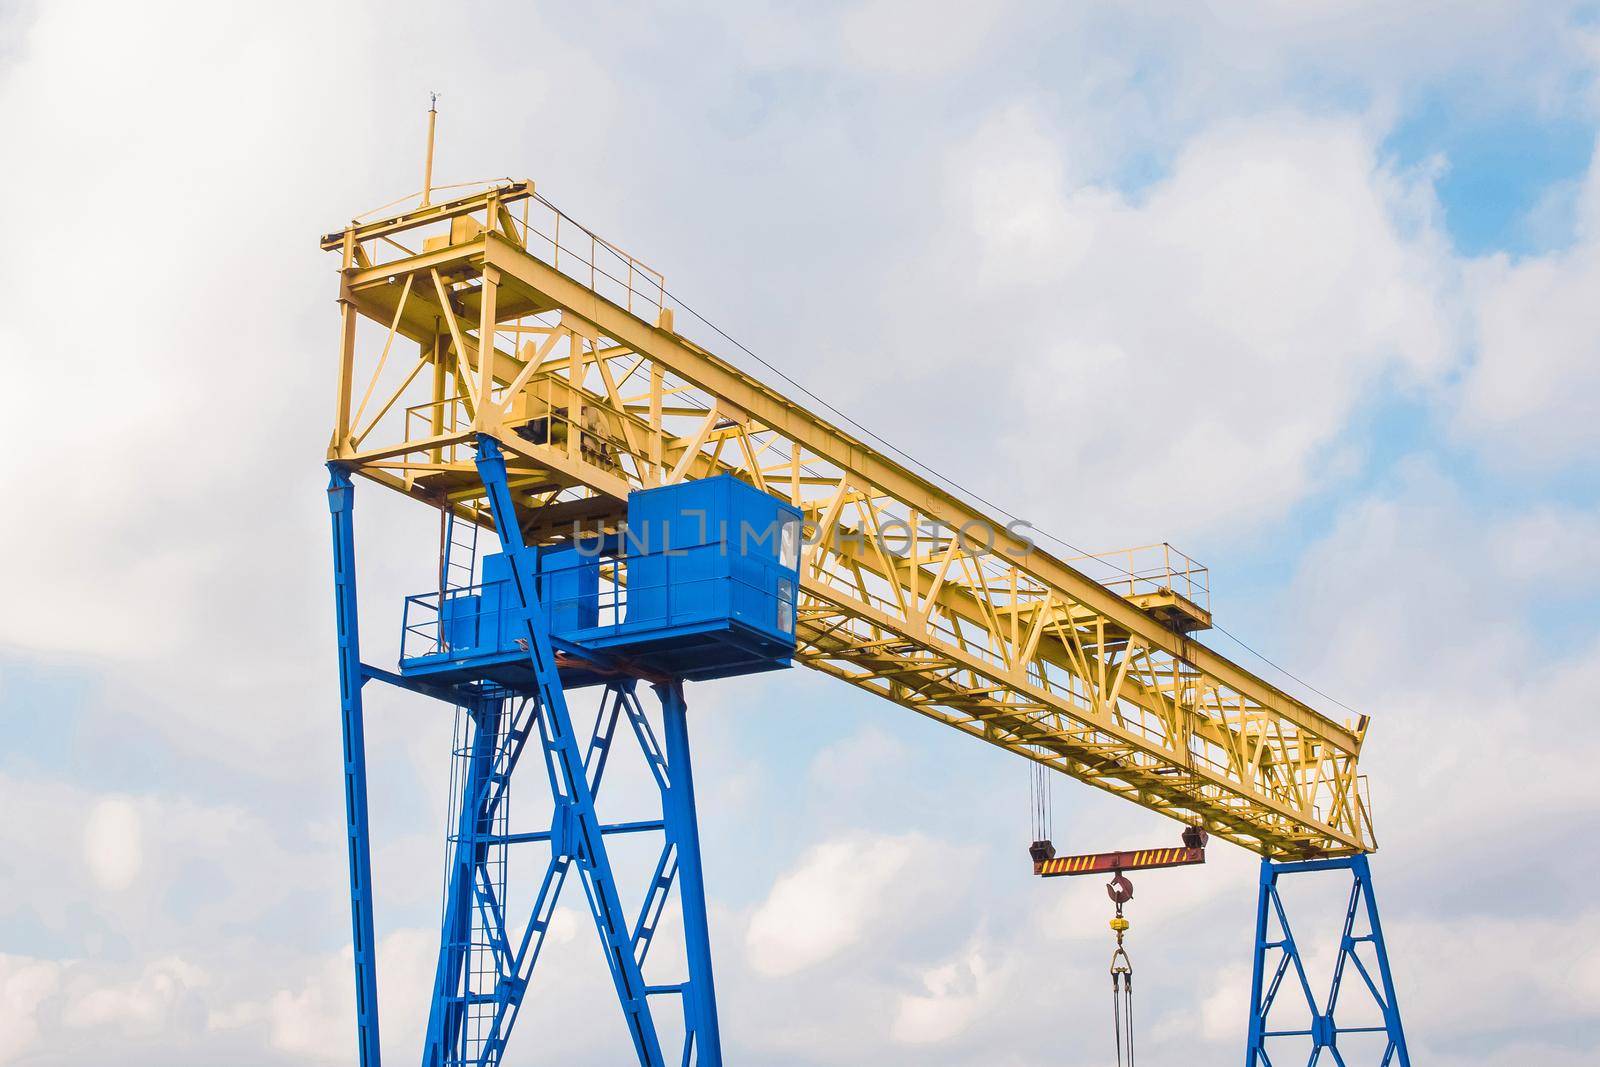 Overhead industrial hoisting crane on a background of blue sky with clouds.